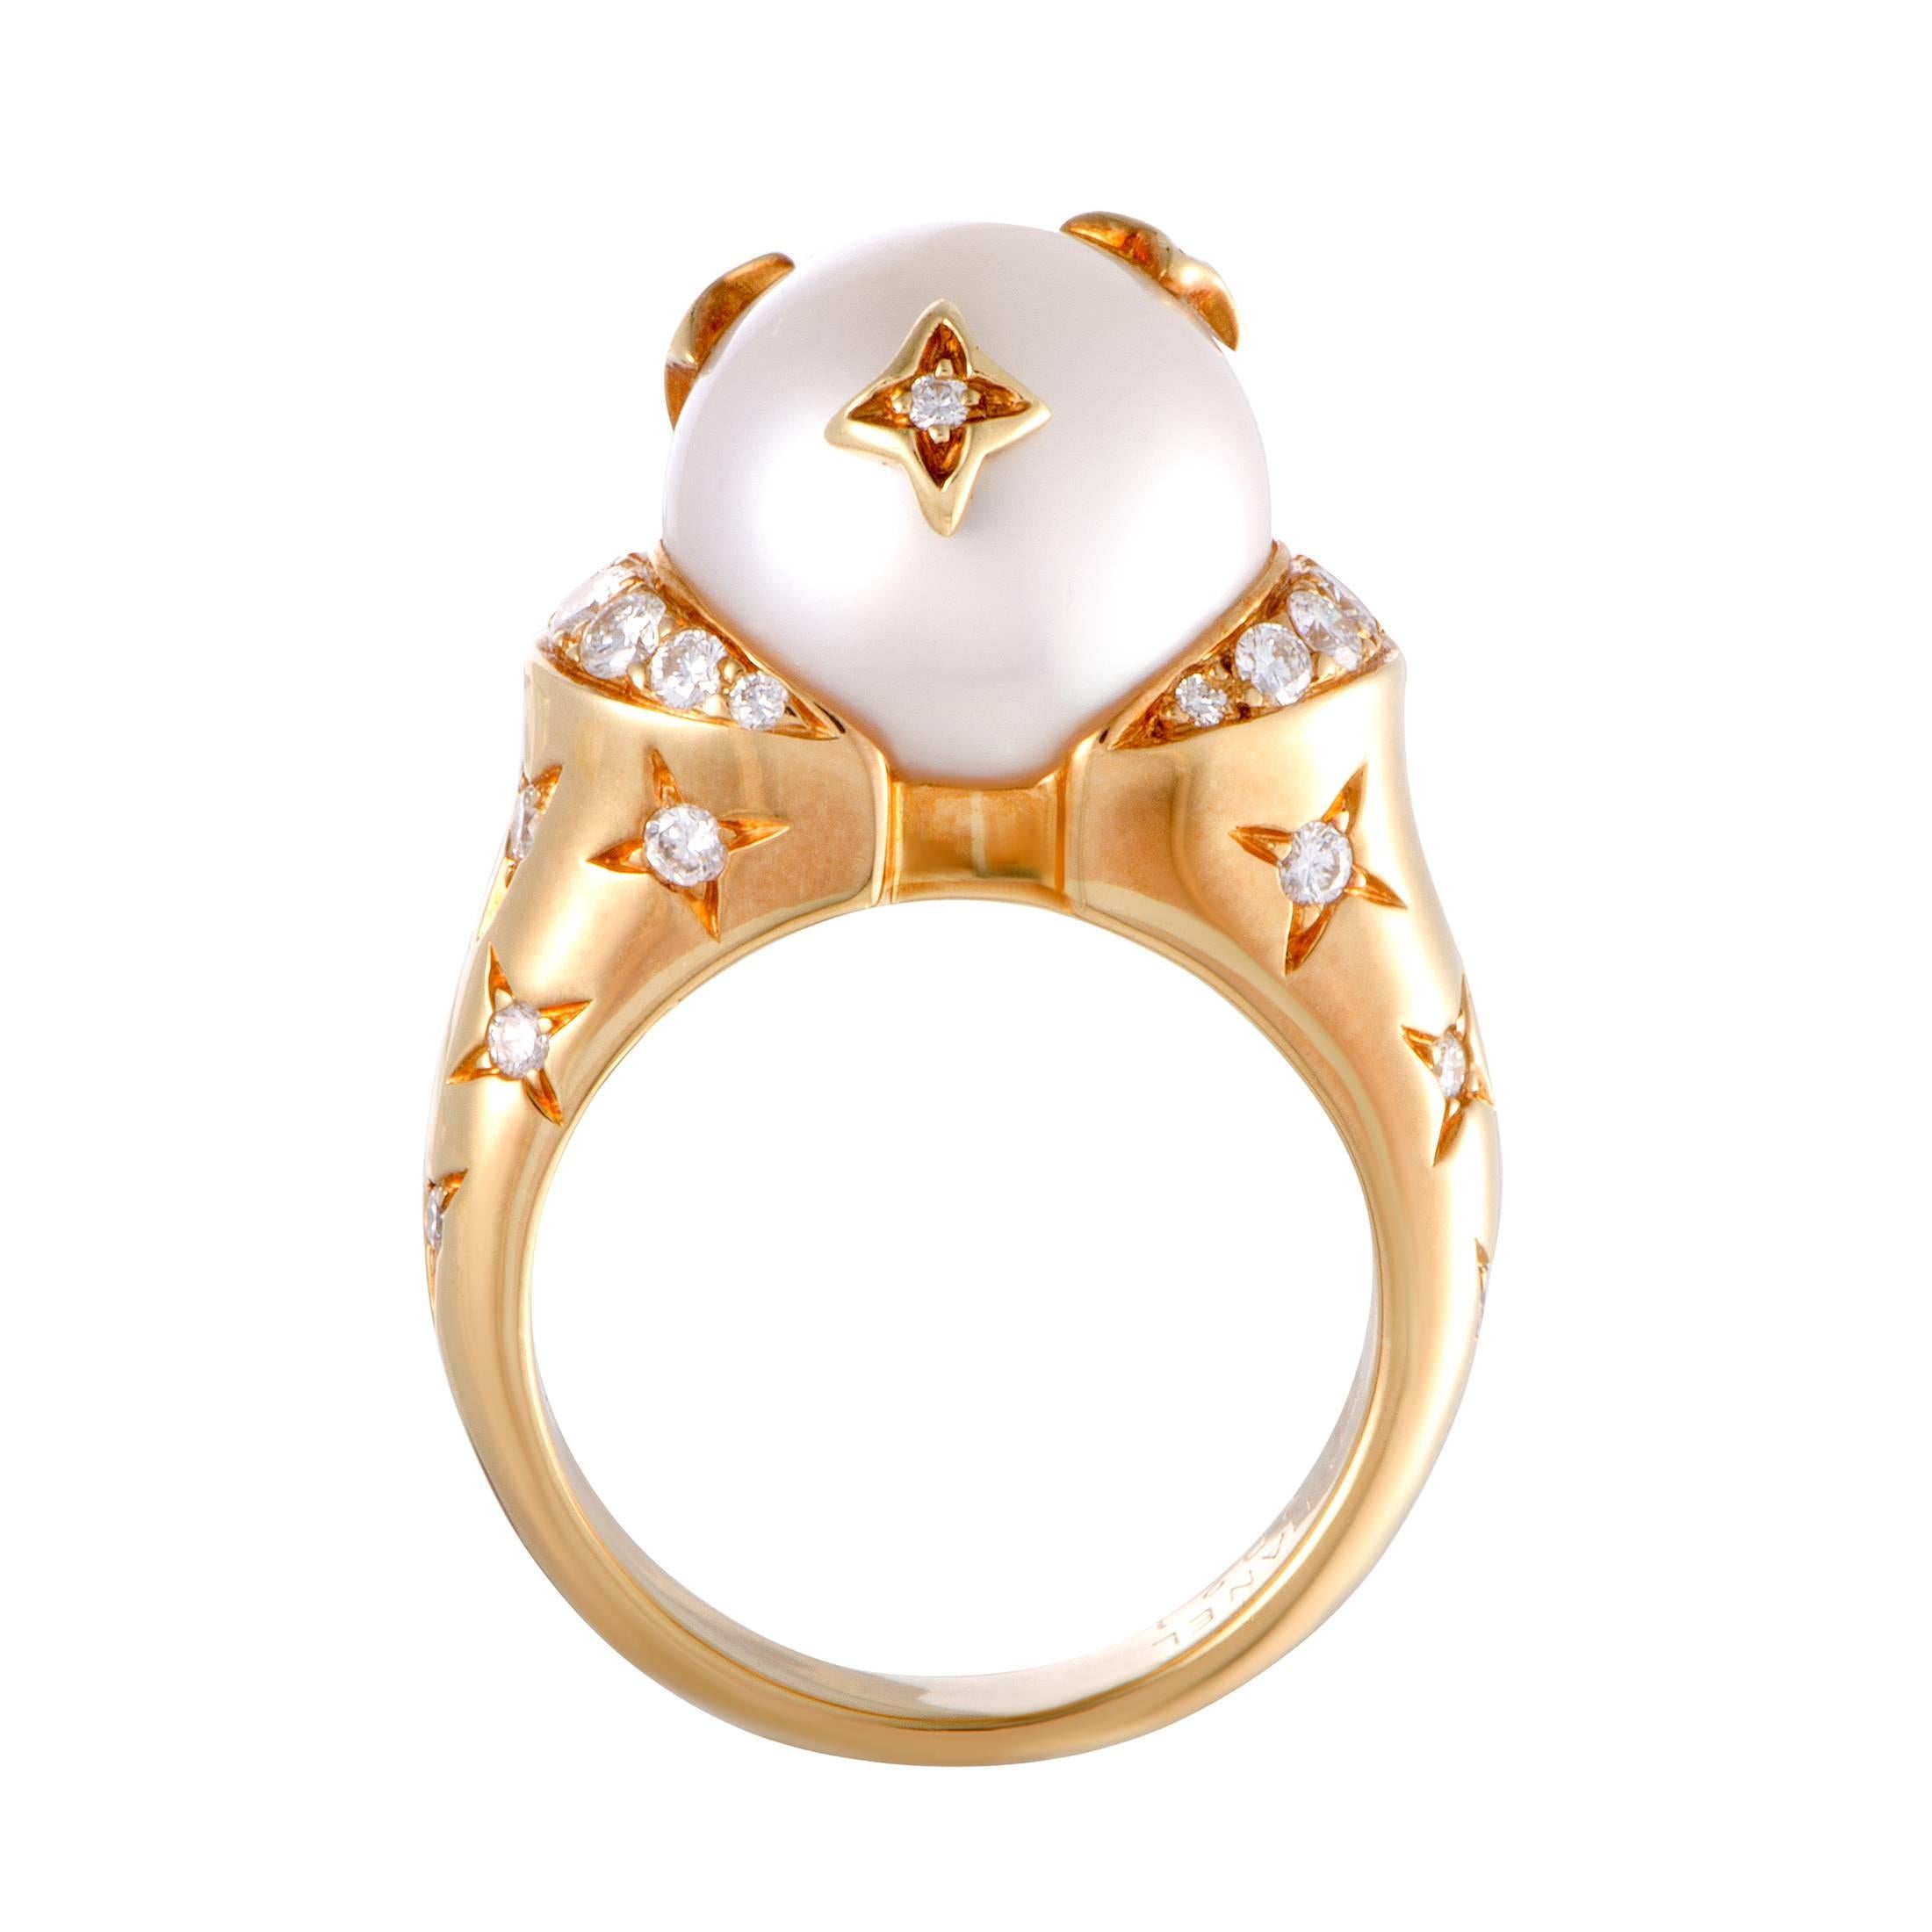 Featuring a splendidly elegant design, this beautiful ring by Chanel from its 'Comete collection' offers an alluringly refined appearance. The stunning ring is made of classy 18K yellow gold and is set with sparkling diamonds and a gorgeous white